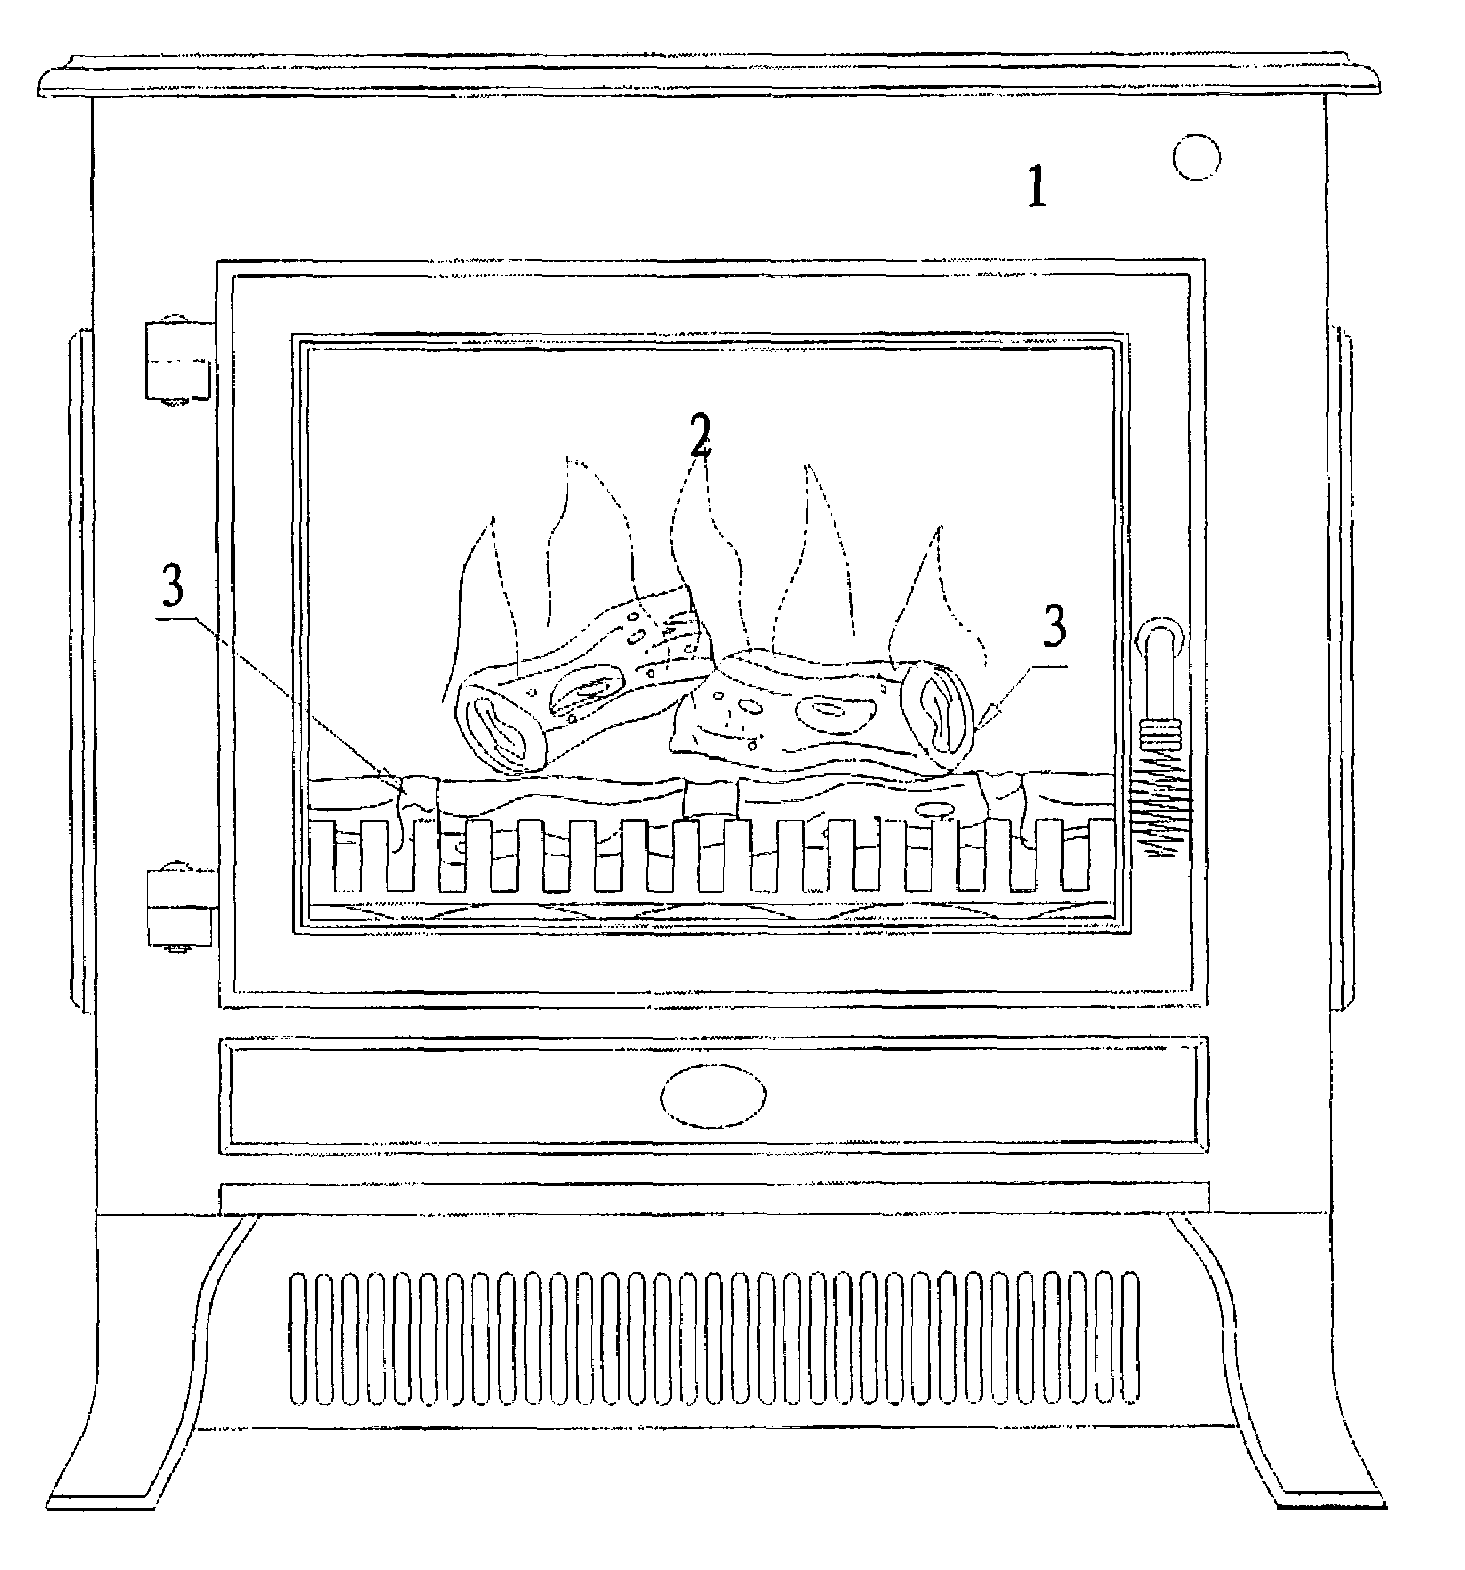 Electric fireplace having a fire simulating assembly